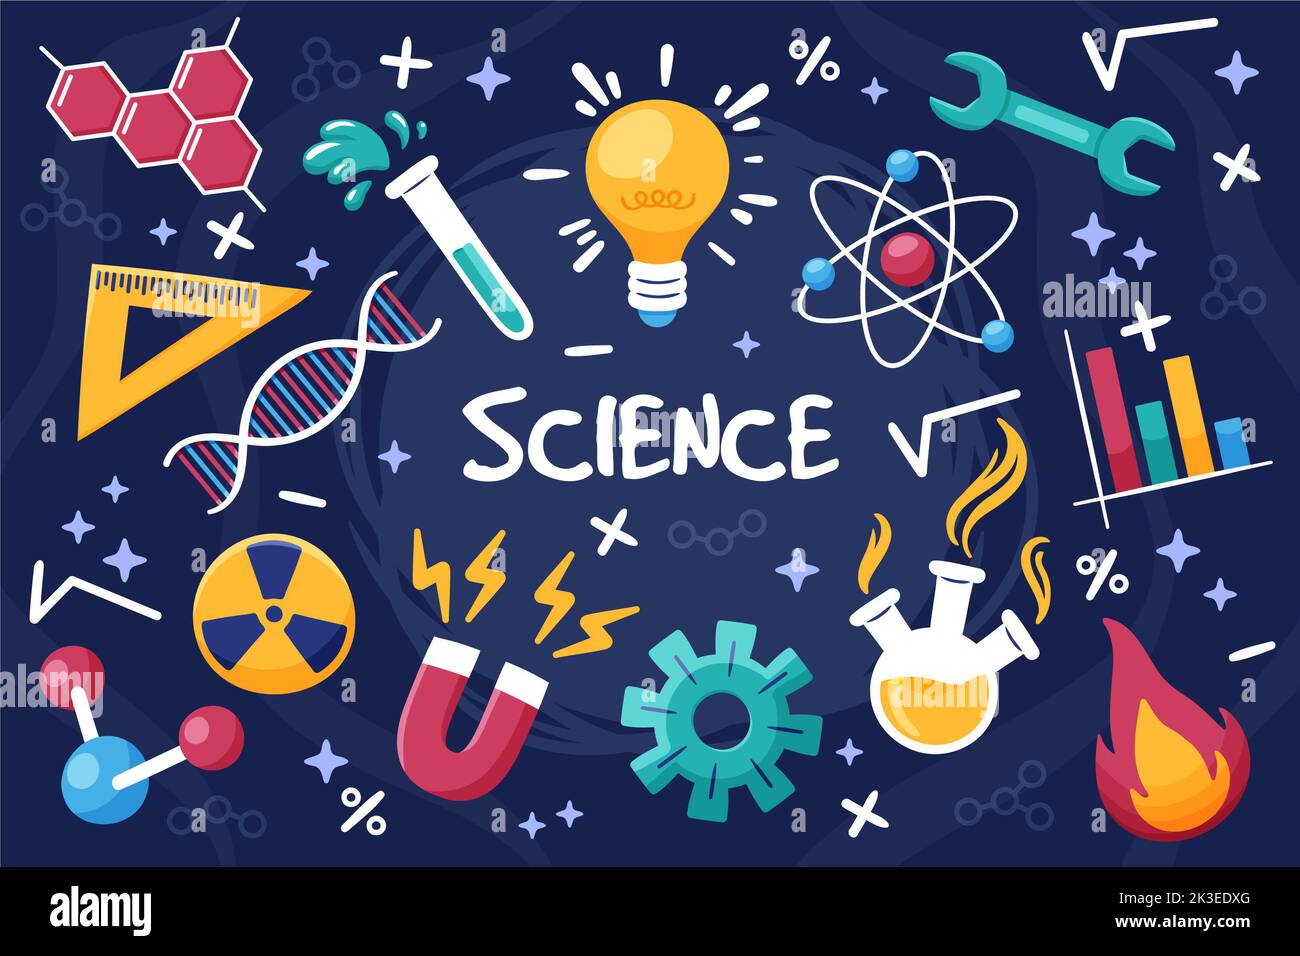 Hand-drawn science education background design Stock Photo